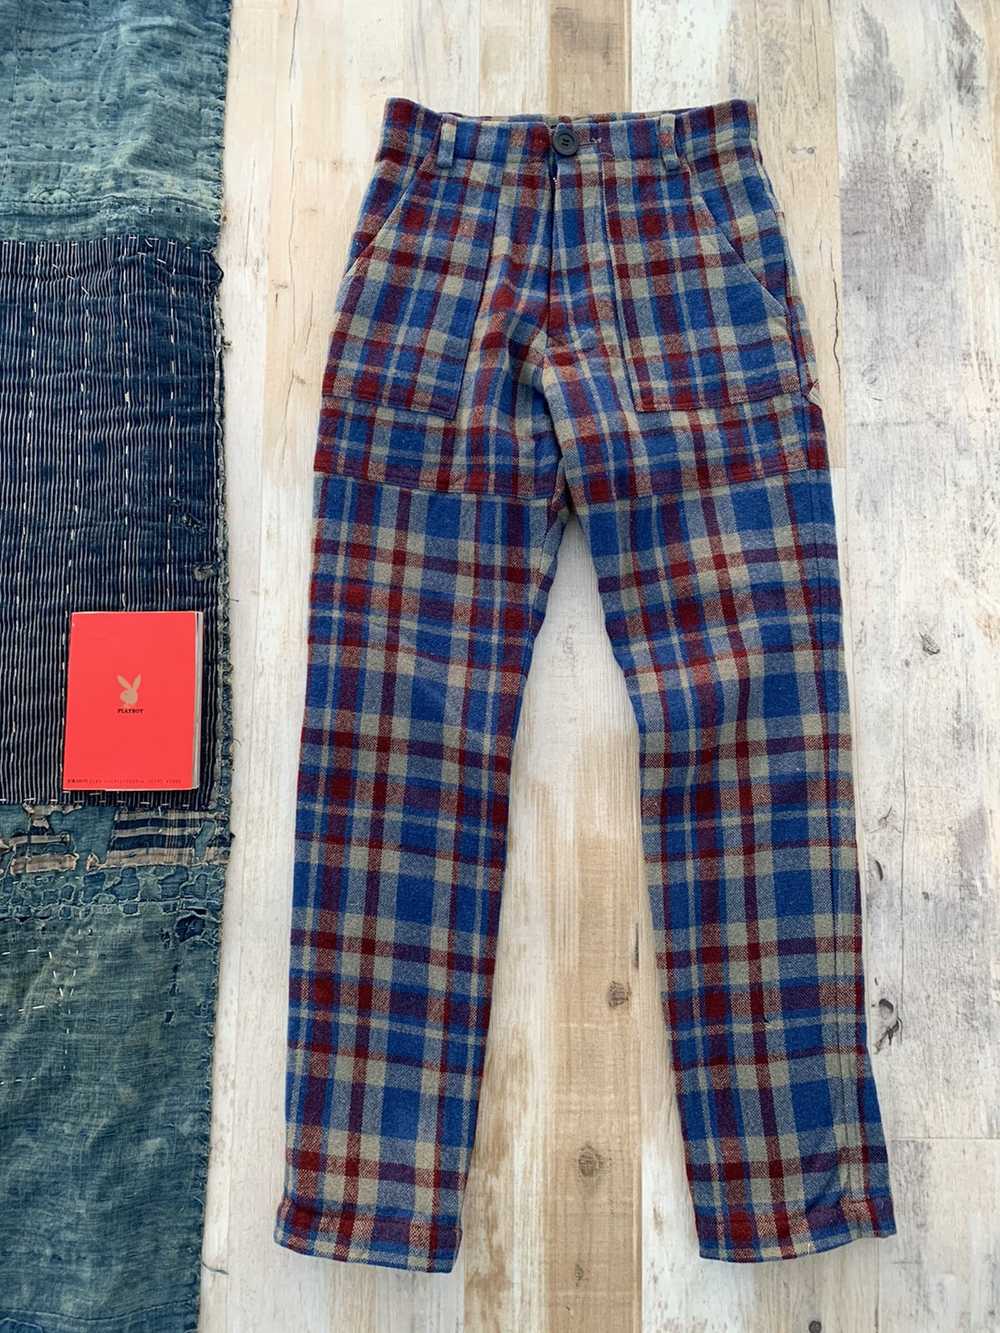 Undercover AW96 Wire Wool Plaid Pants - image 2